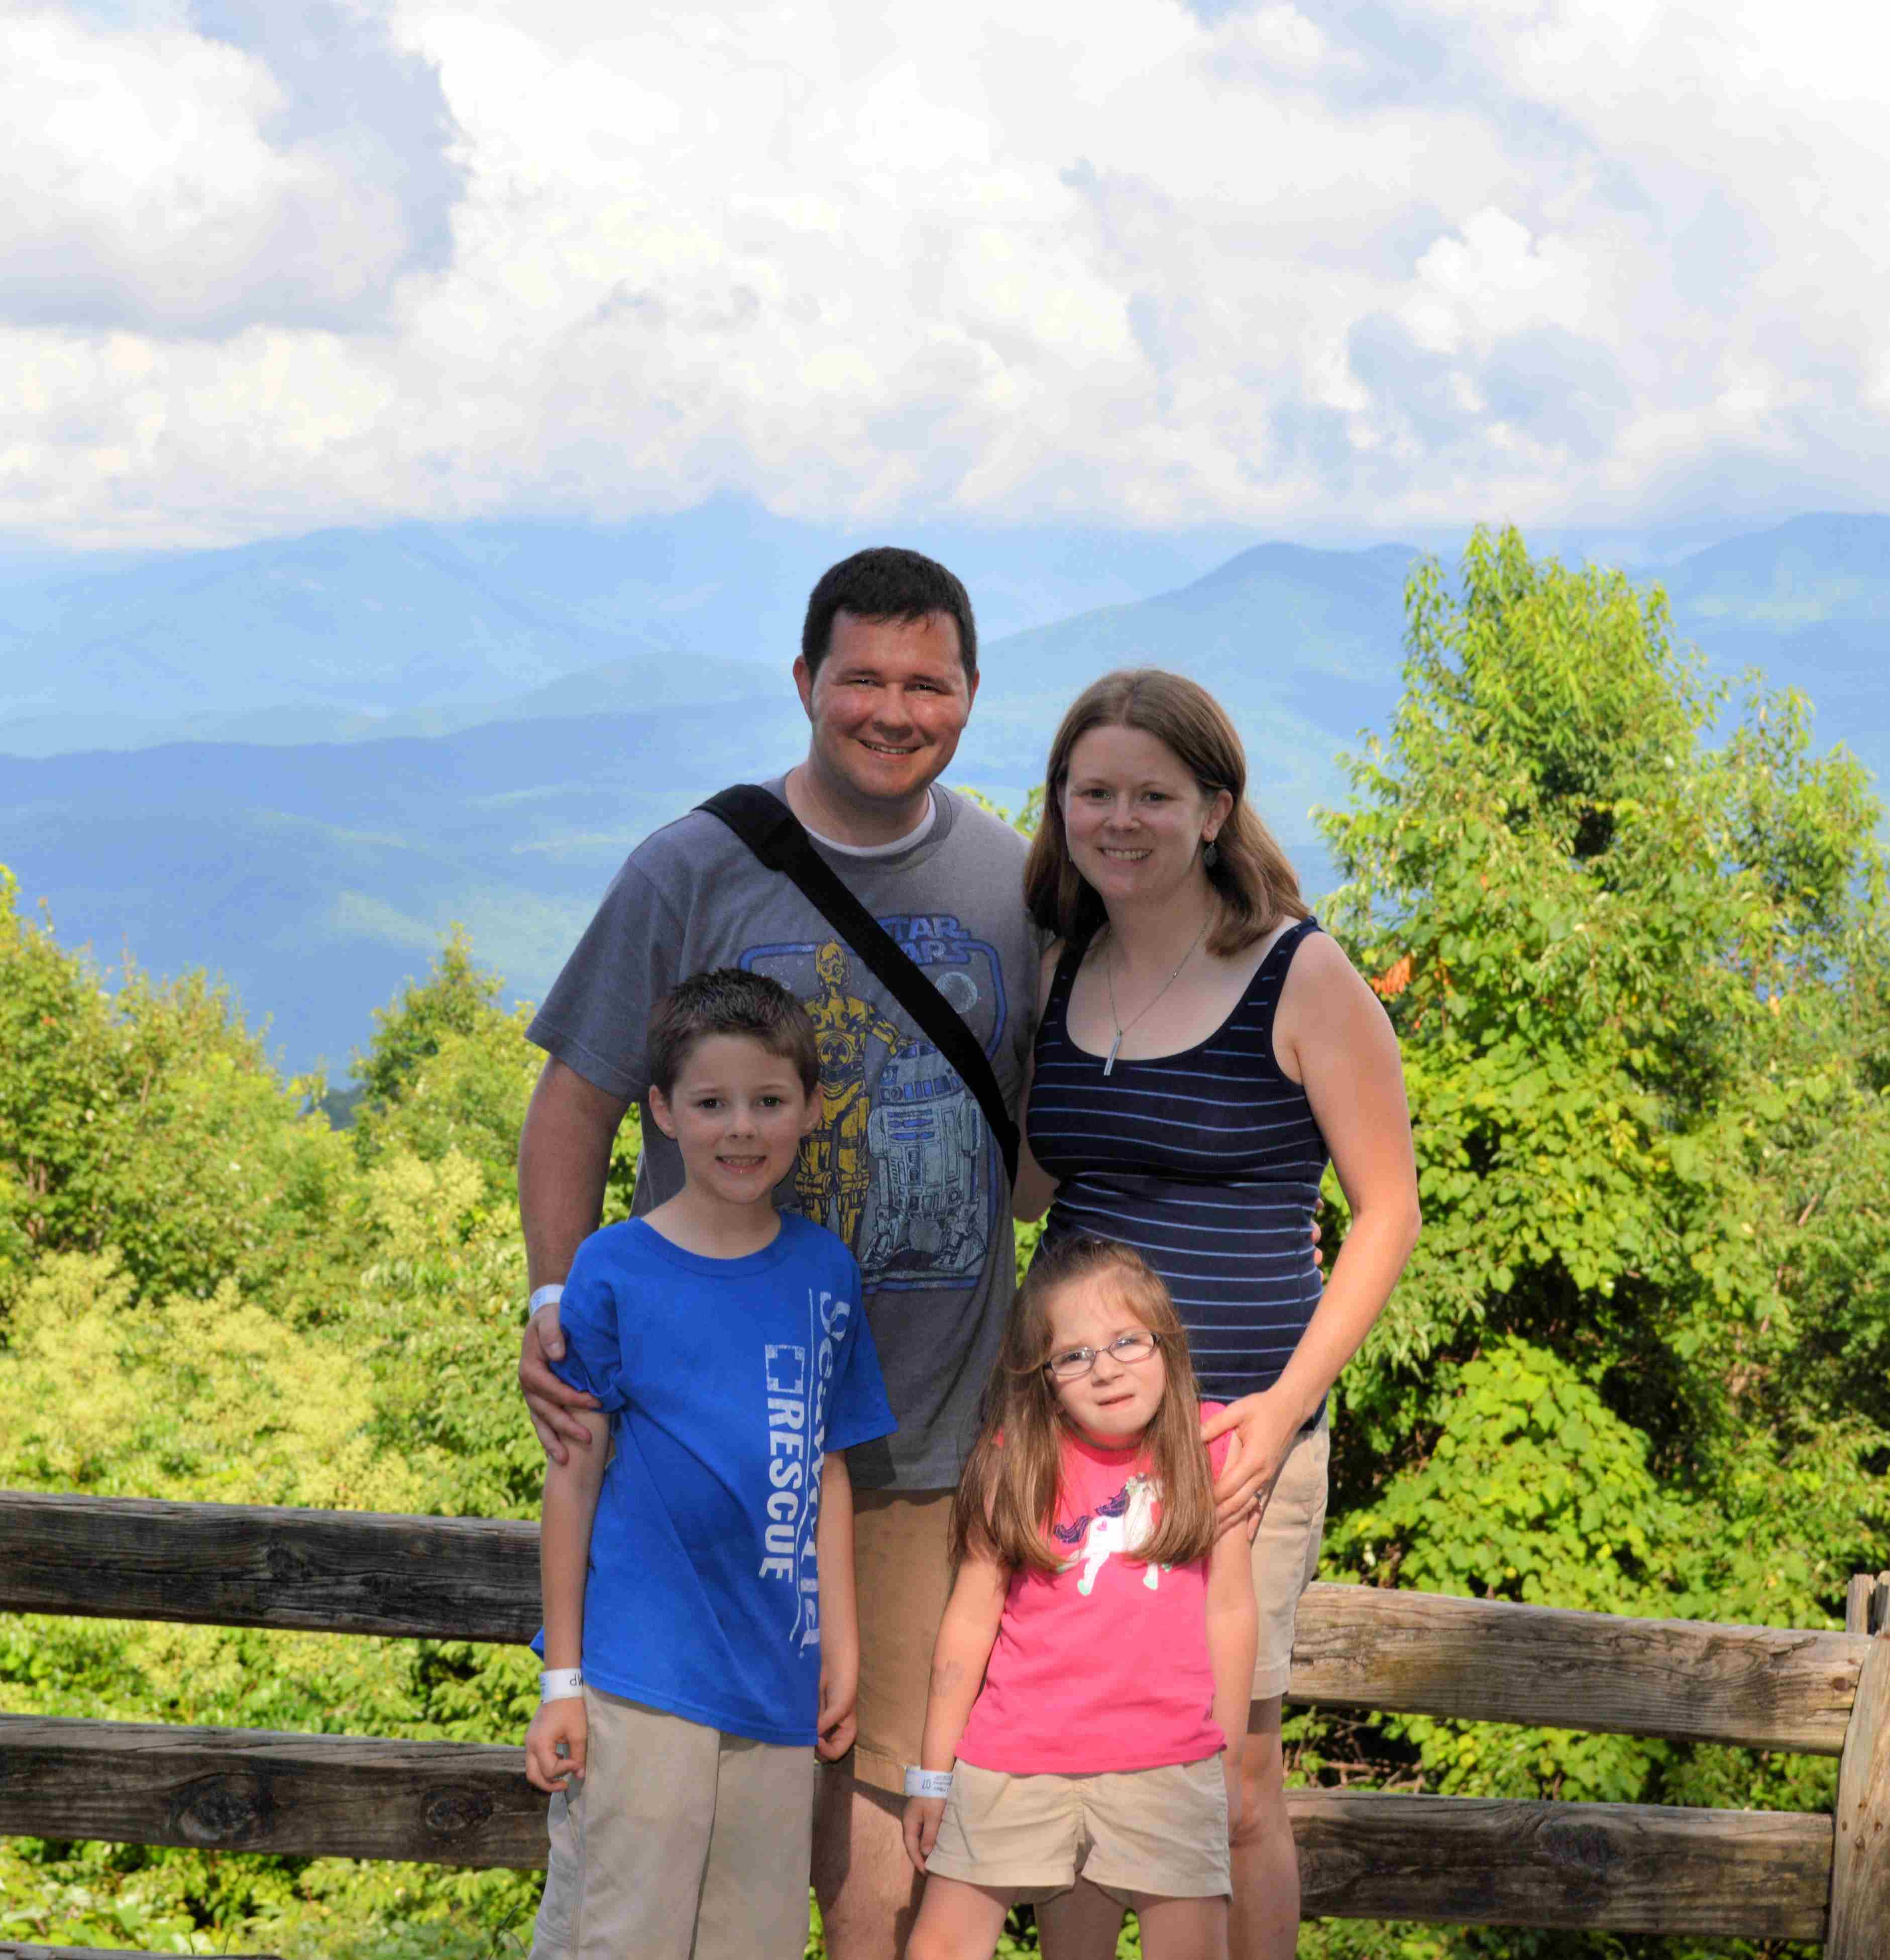 Julie and her family in front of a mountain landscape